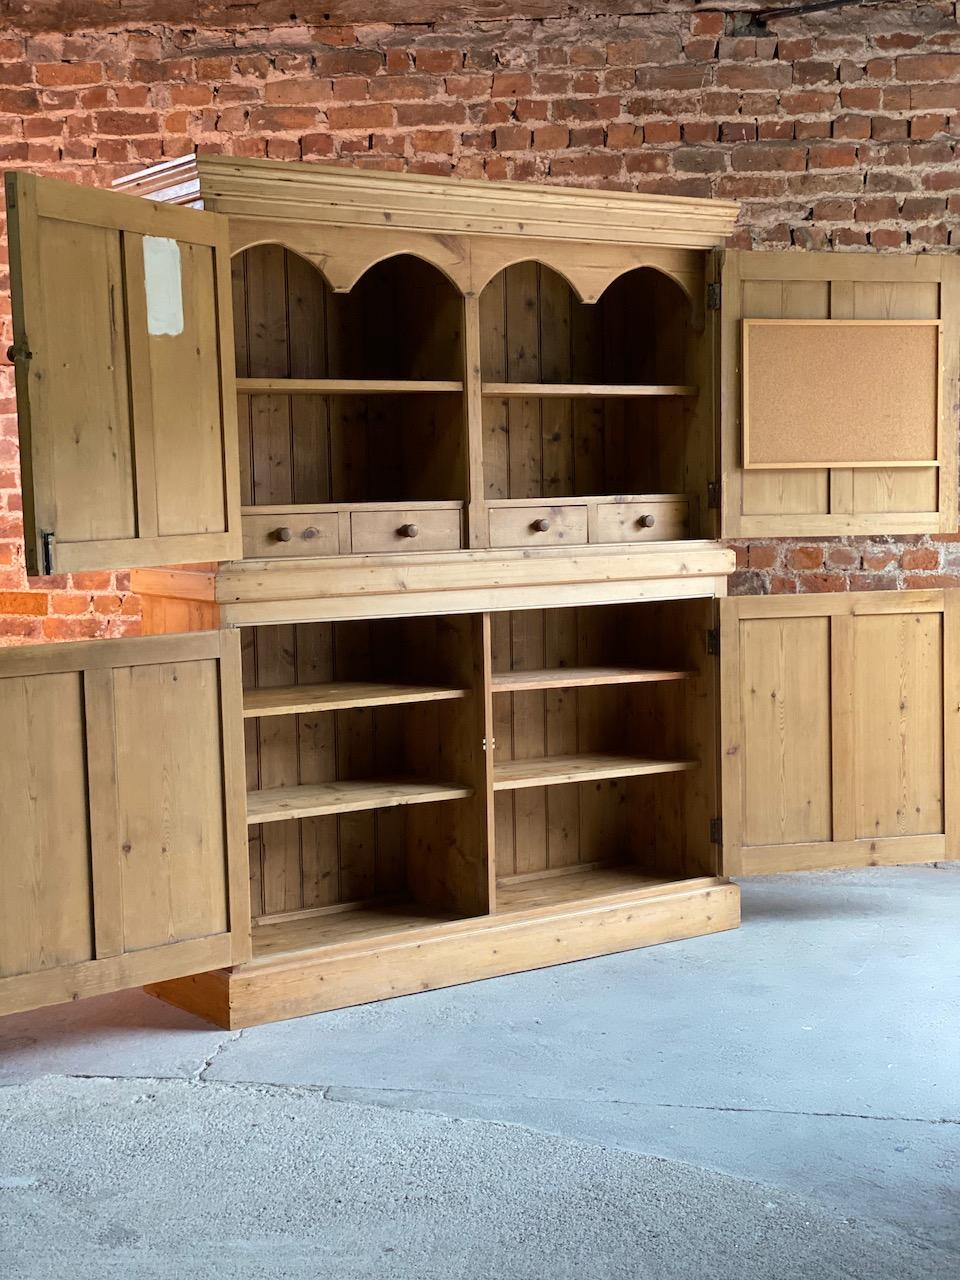 Antique Pine School Cupboard Pantry, Early 20th Century 1